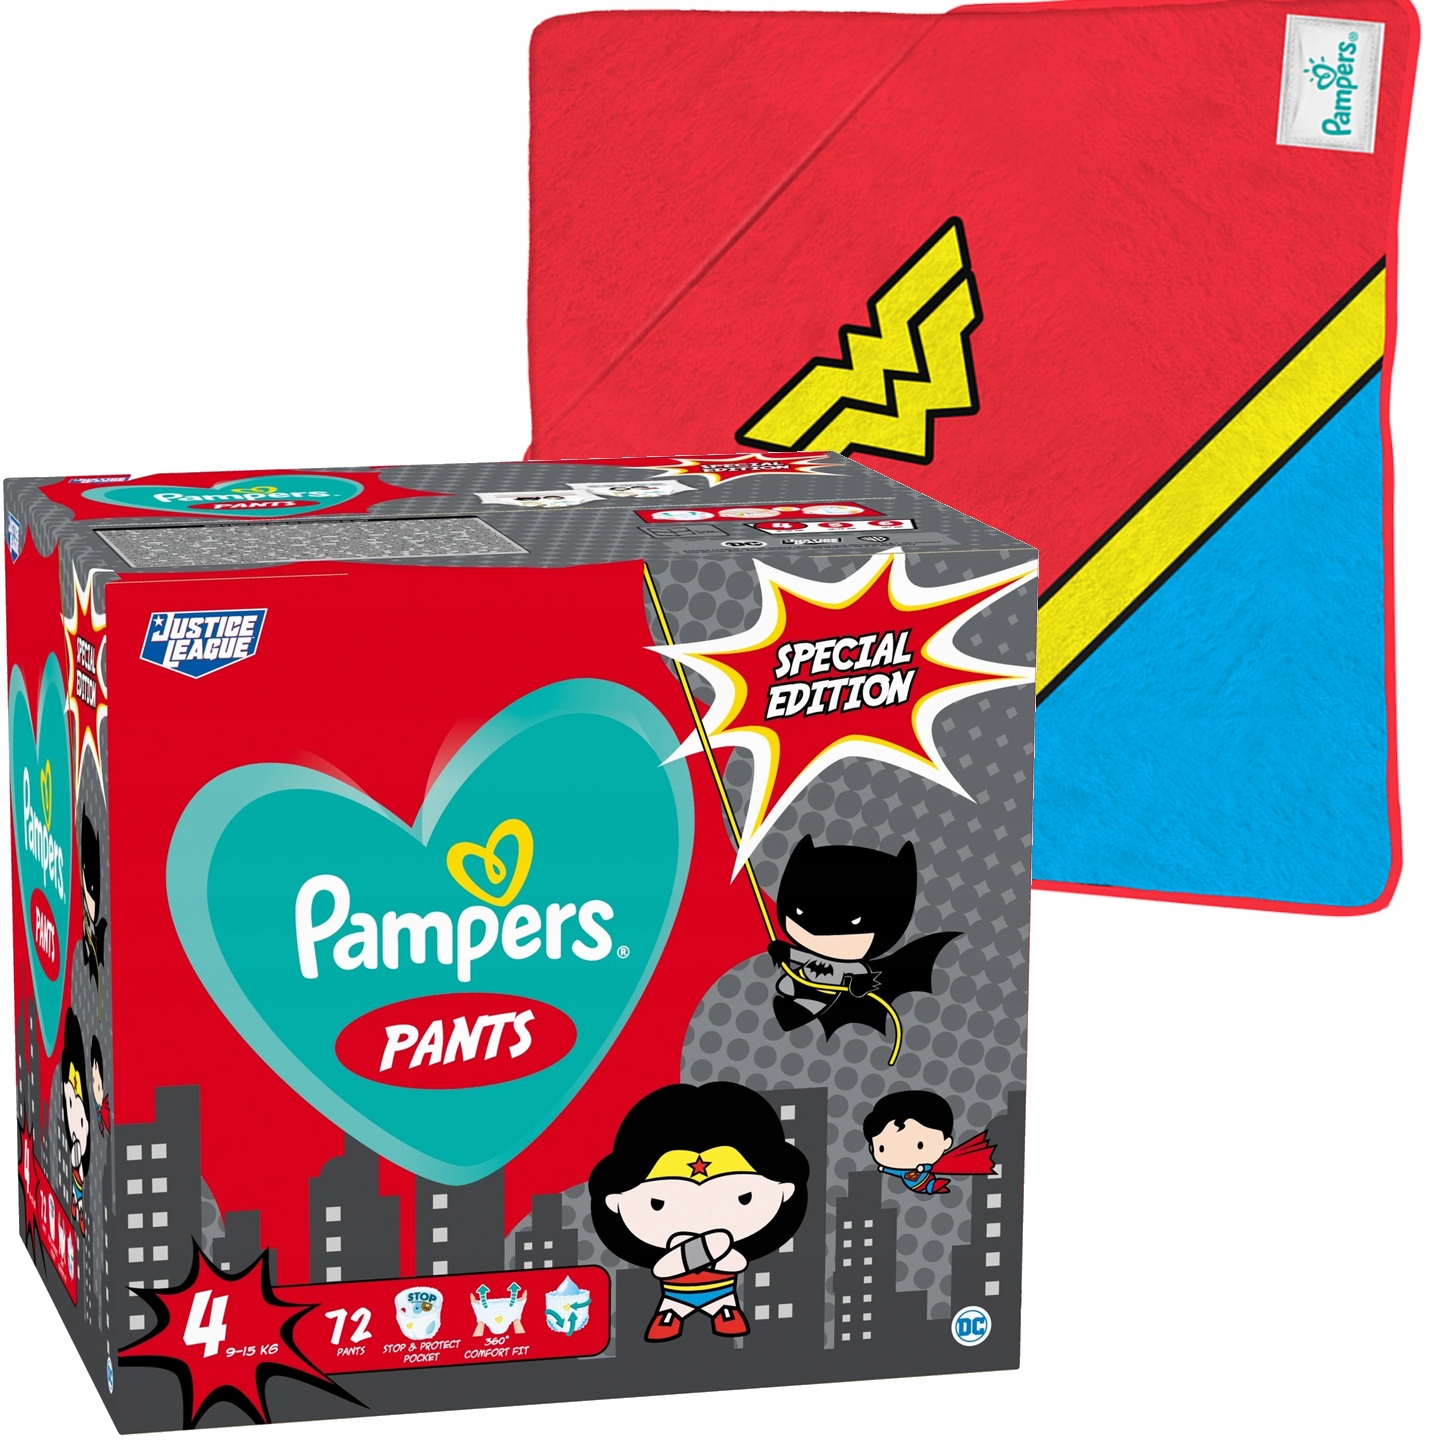 pampers biedronka giant pack 51 99